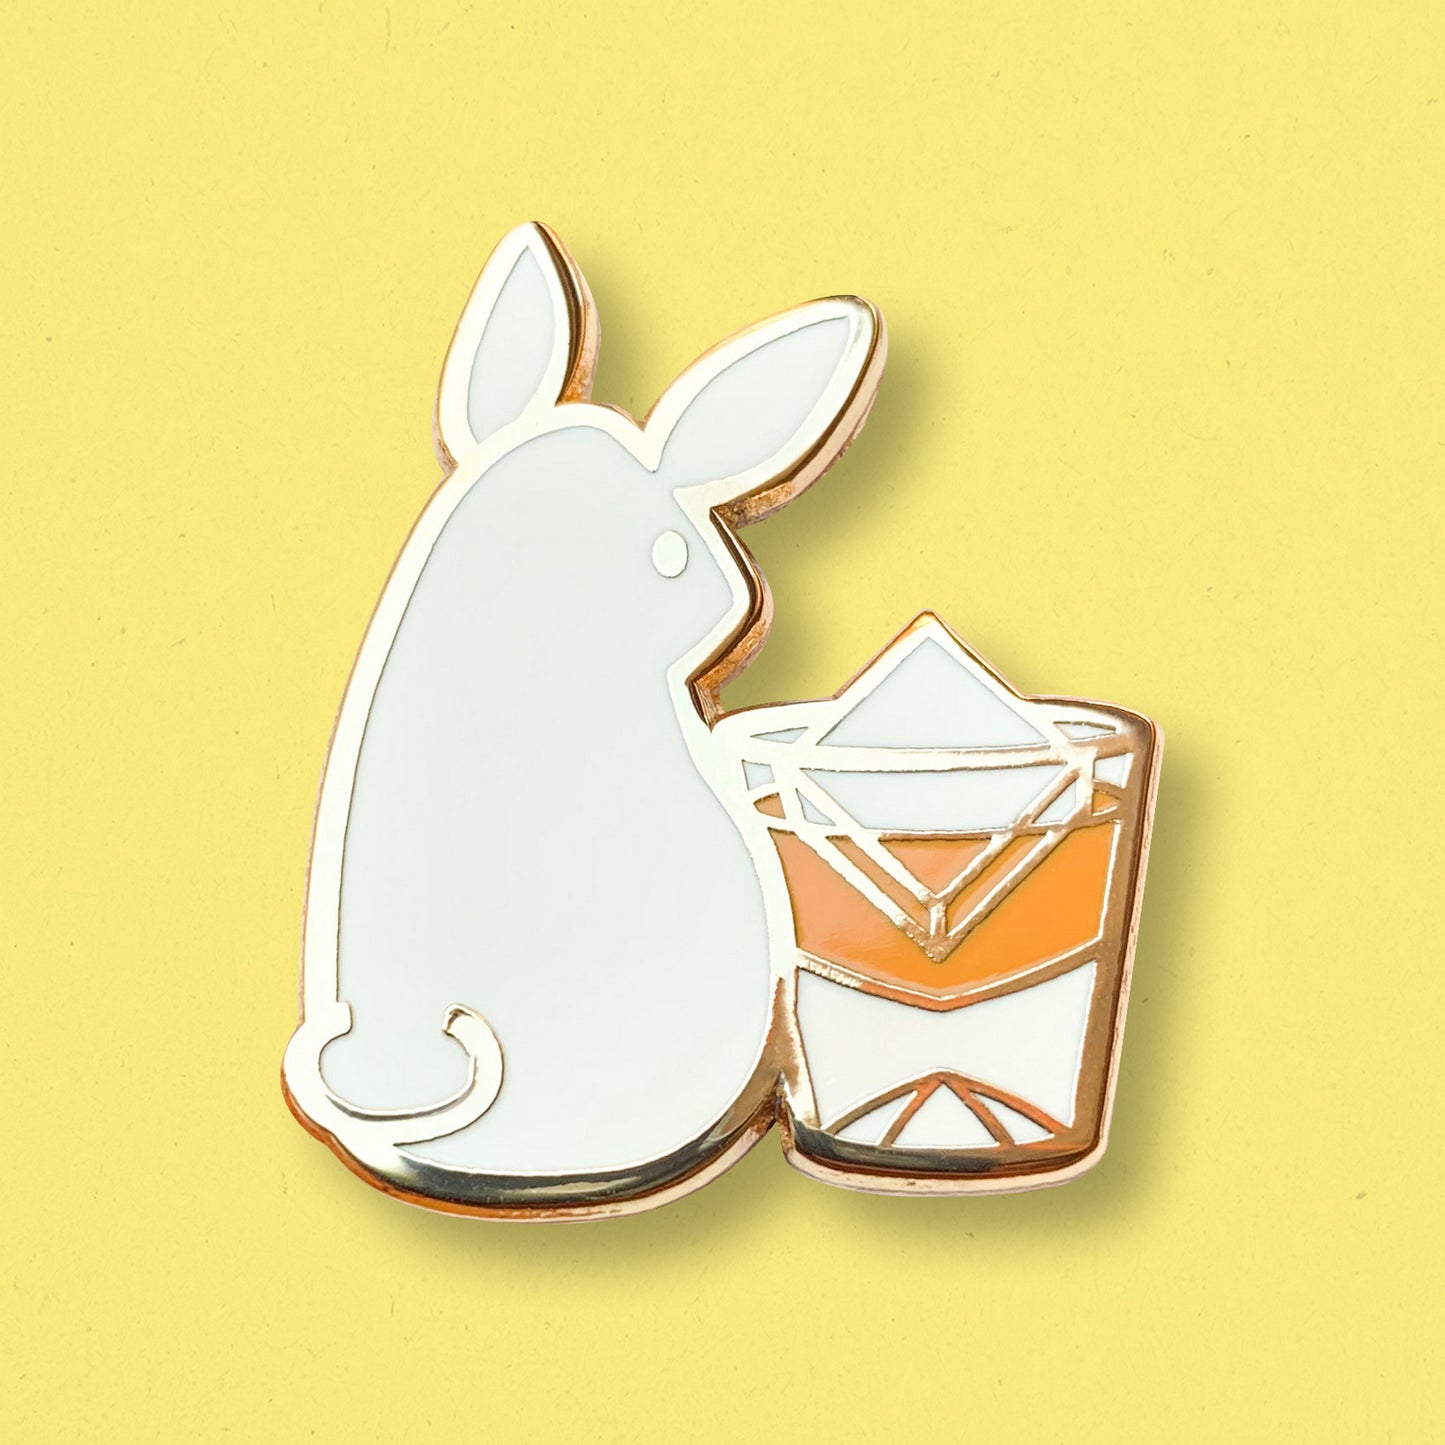 Rabbit & Whisky Hard Enamel Pin by Cocktail Critters